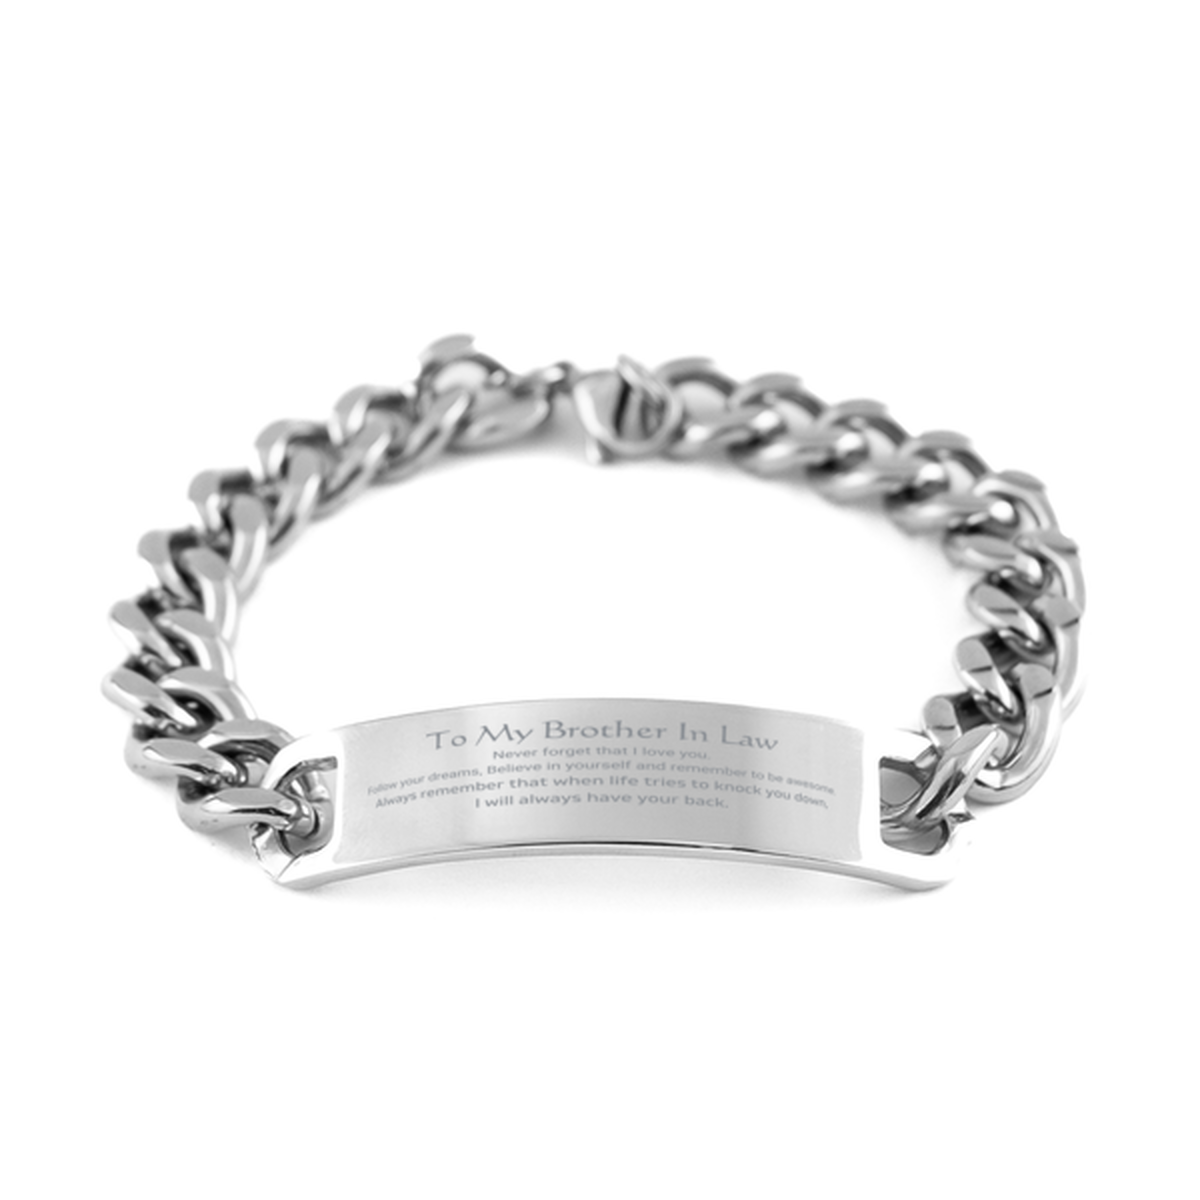 Inspirational Gifts for Brother In Law, Follow your dreams, Believe in yourself, Brother In Law Cuban Chain Stainless Steel Bracelet, Birthday Christmas Unique Gifts For Brother In Law